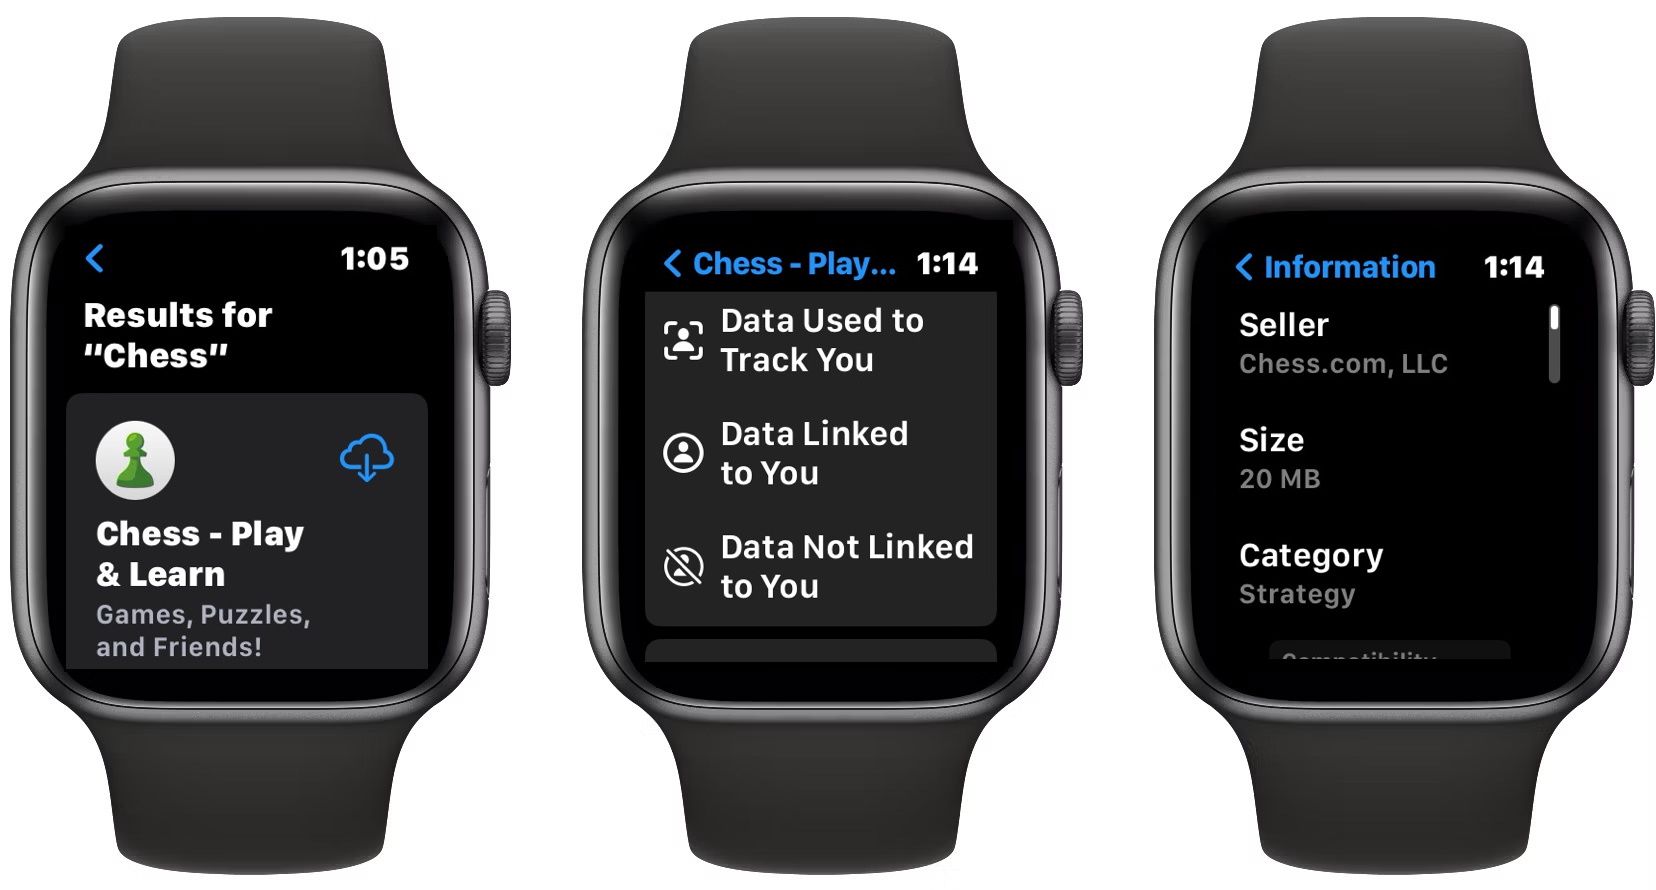 Apple Watch Check apps information app store